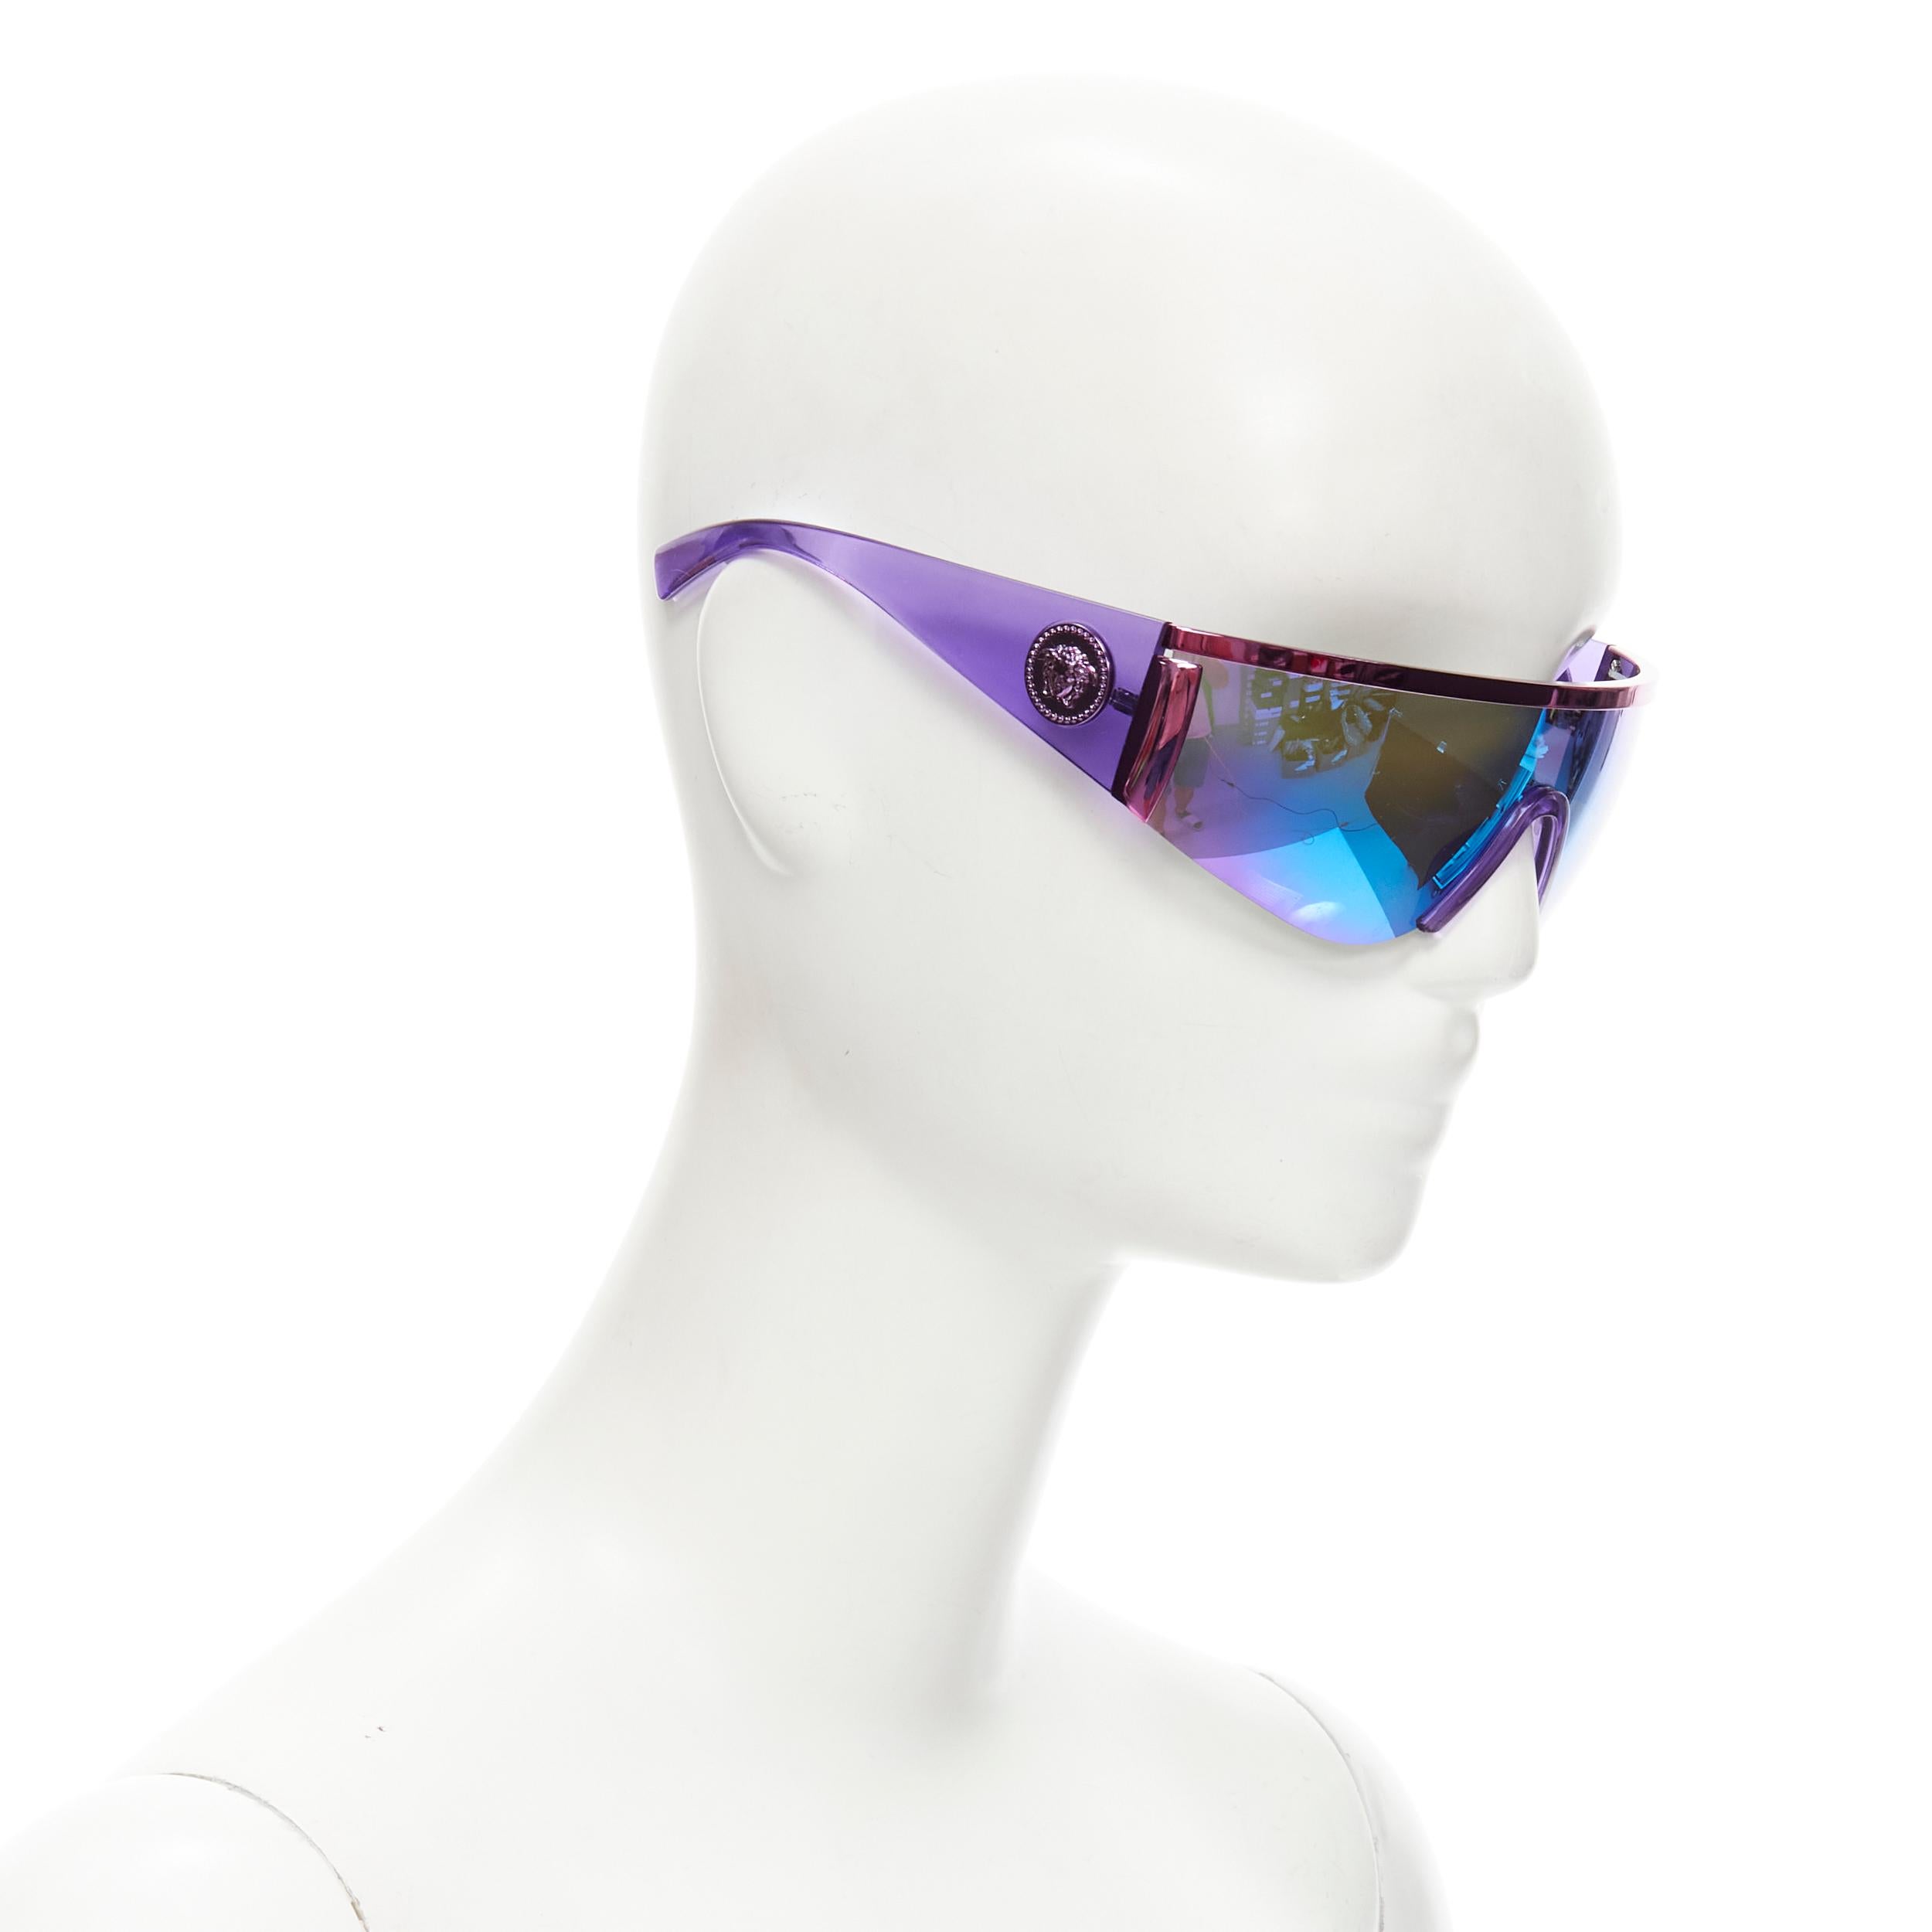 new VERSACE VE2197 2018 Tribute Medusa purple blue reflective sunglasses 
Reference: TGAS/C00245 
Brand: Versace 
Designer: Donatella Versace 
Collection: Tribute 
Material: Metal 
Color: Purple 
Pattern: Solid 
Extra Detail: From the 2018 Tribute